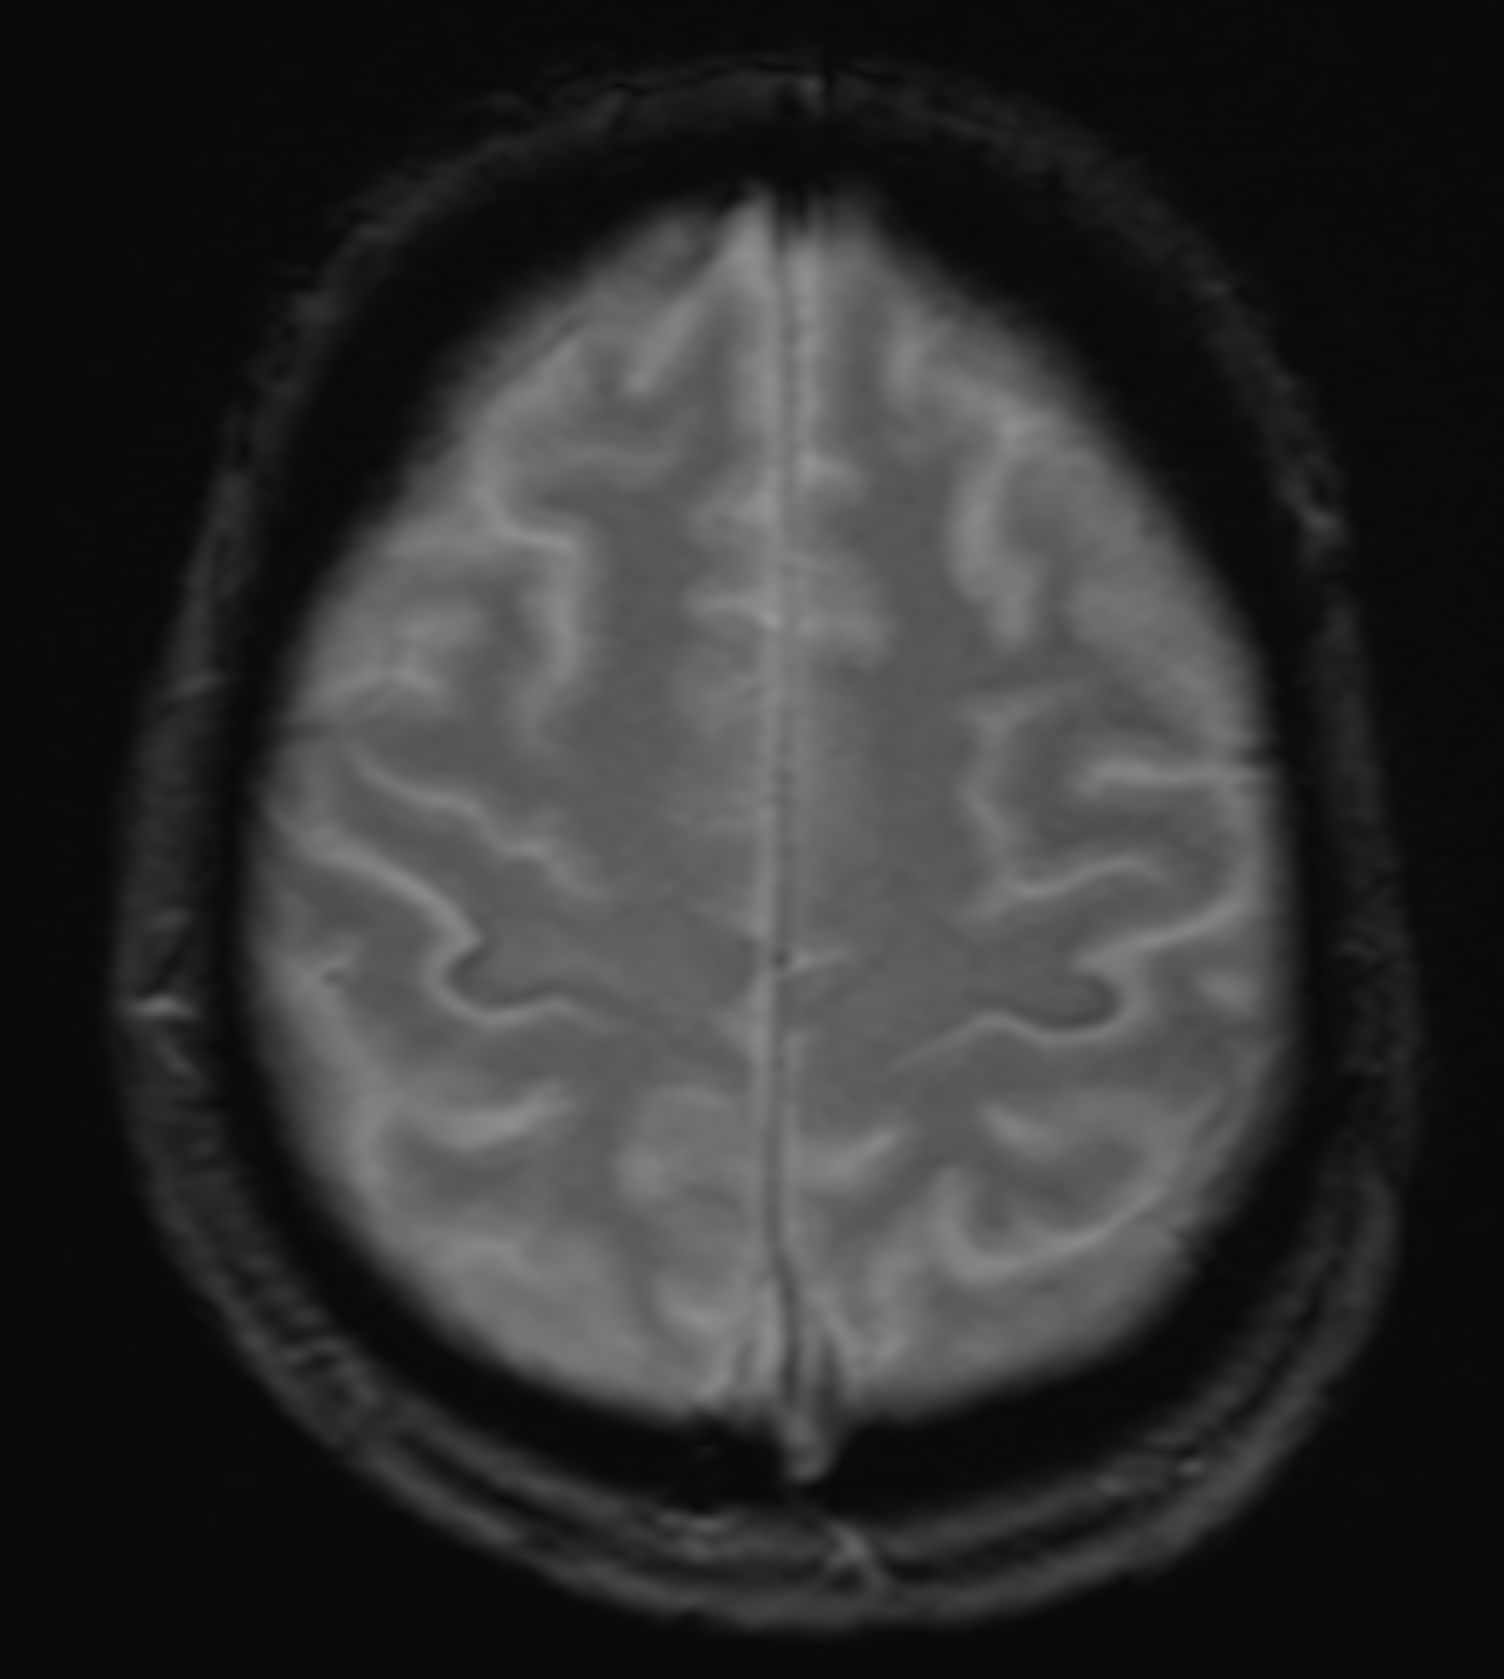 MRI GRE sequence demonstrating iron deposition in the precentral gyrus (motor band sign) in a patient with amyotrophic lateral sclerosis.